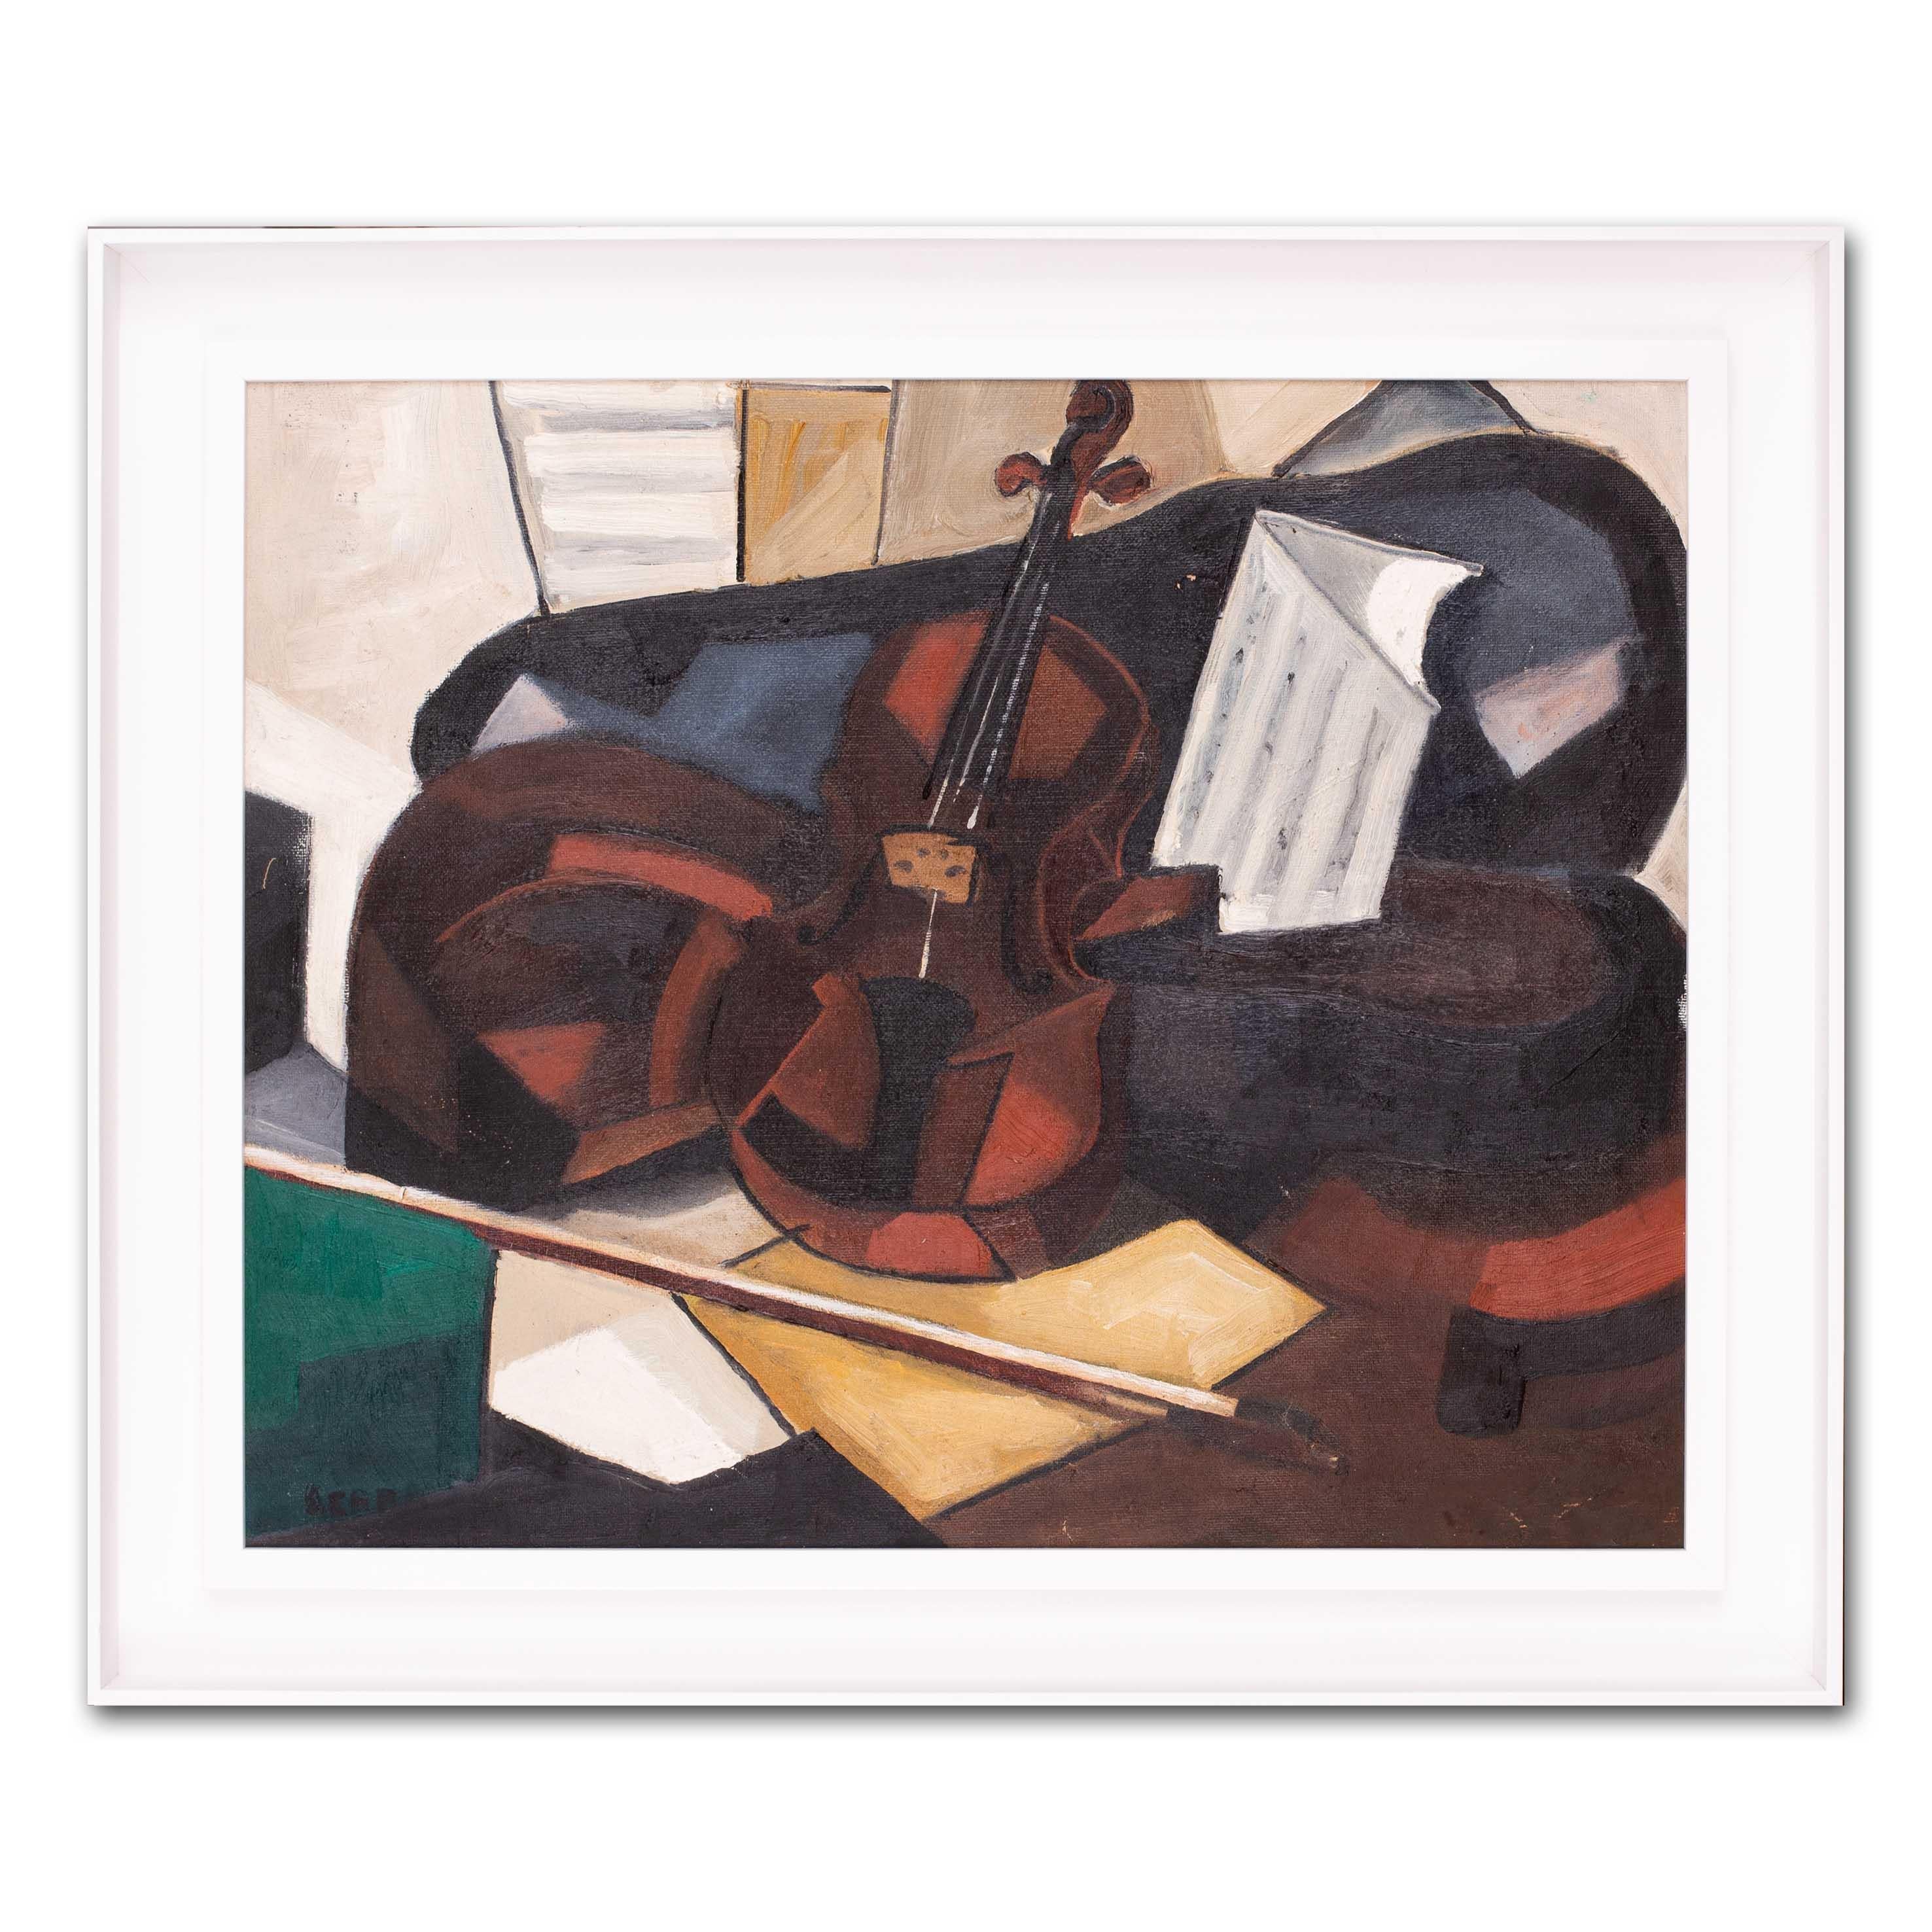 Serra (French, 20th Century)
Homage au violin
Oil on canvas laid down on board
Signed ‘SERRA’ (lower right)
16.7/8 x 20.7/8 in. (43 x 53 cm.)
